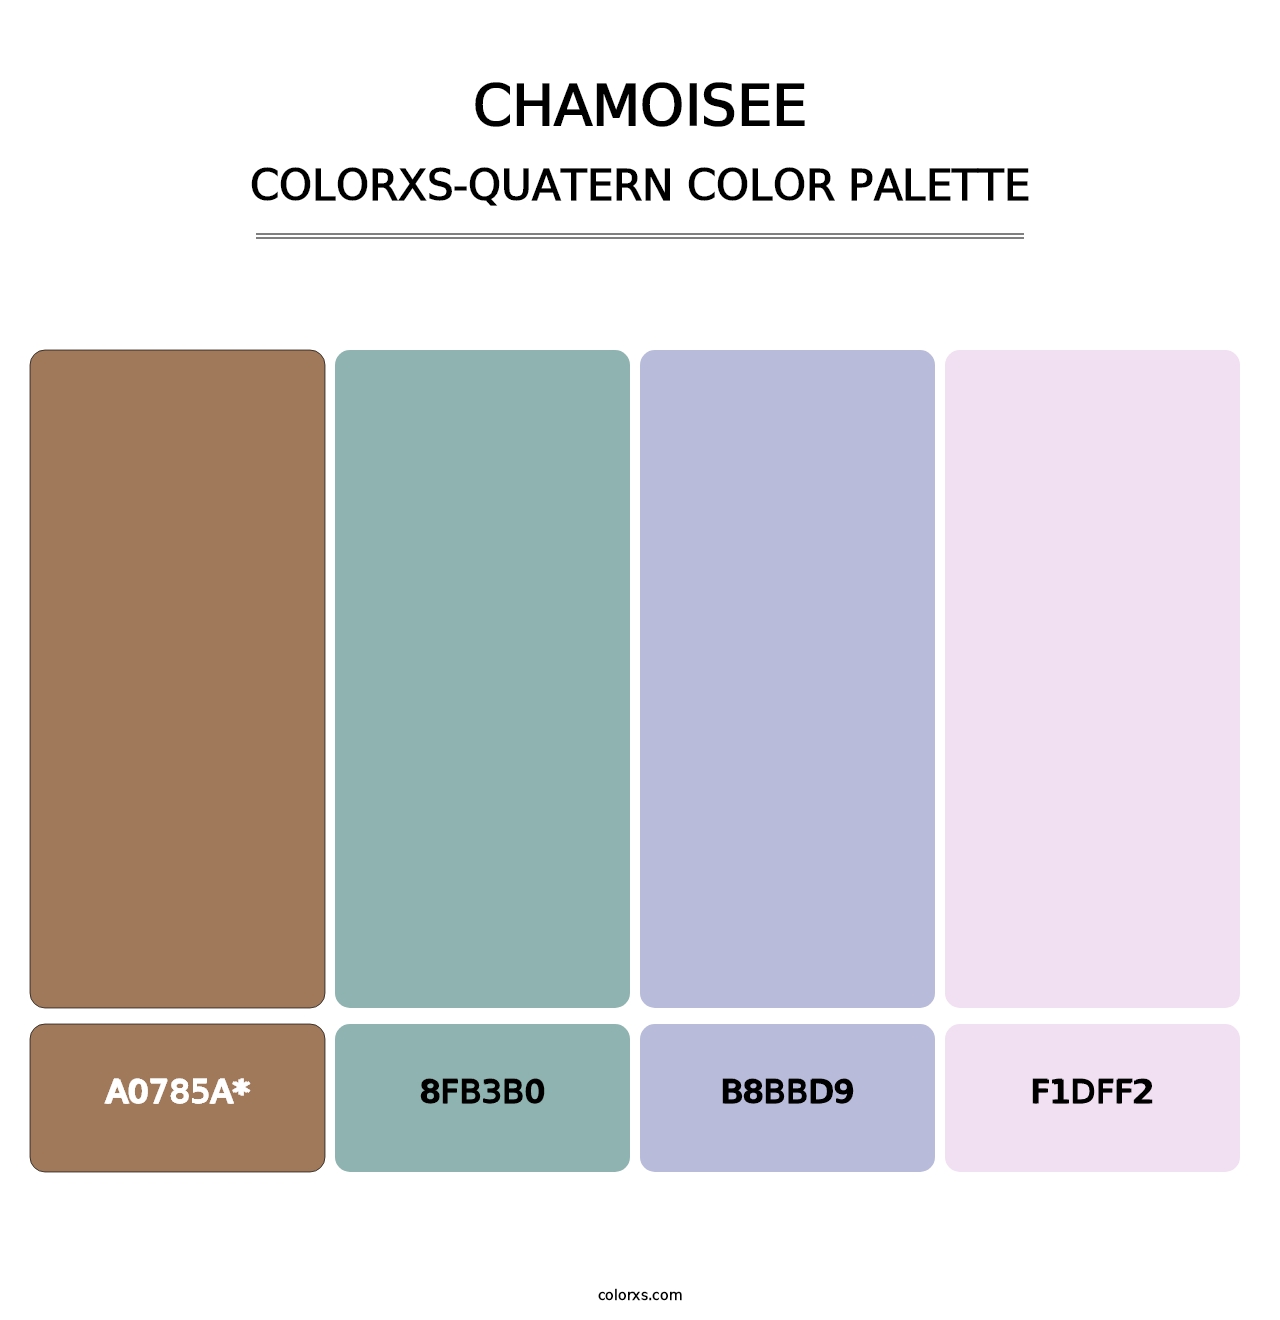 Chamoisee - Colorxs Quatern Palette